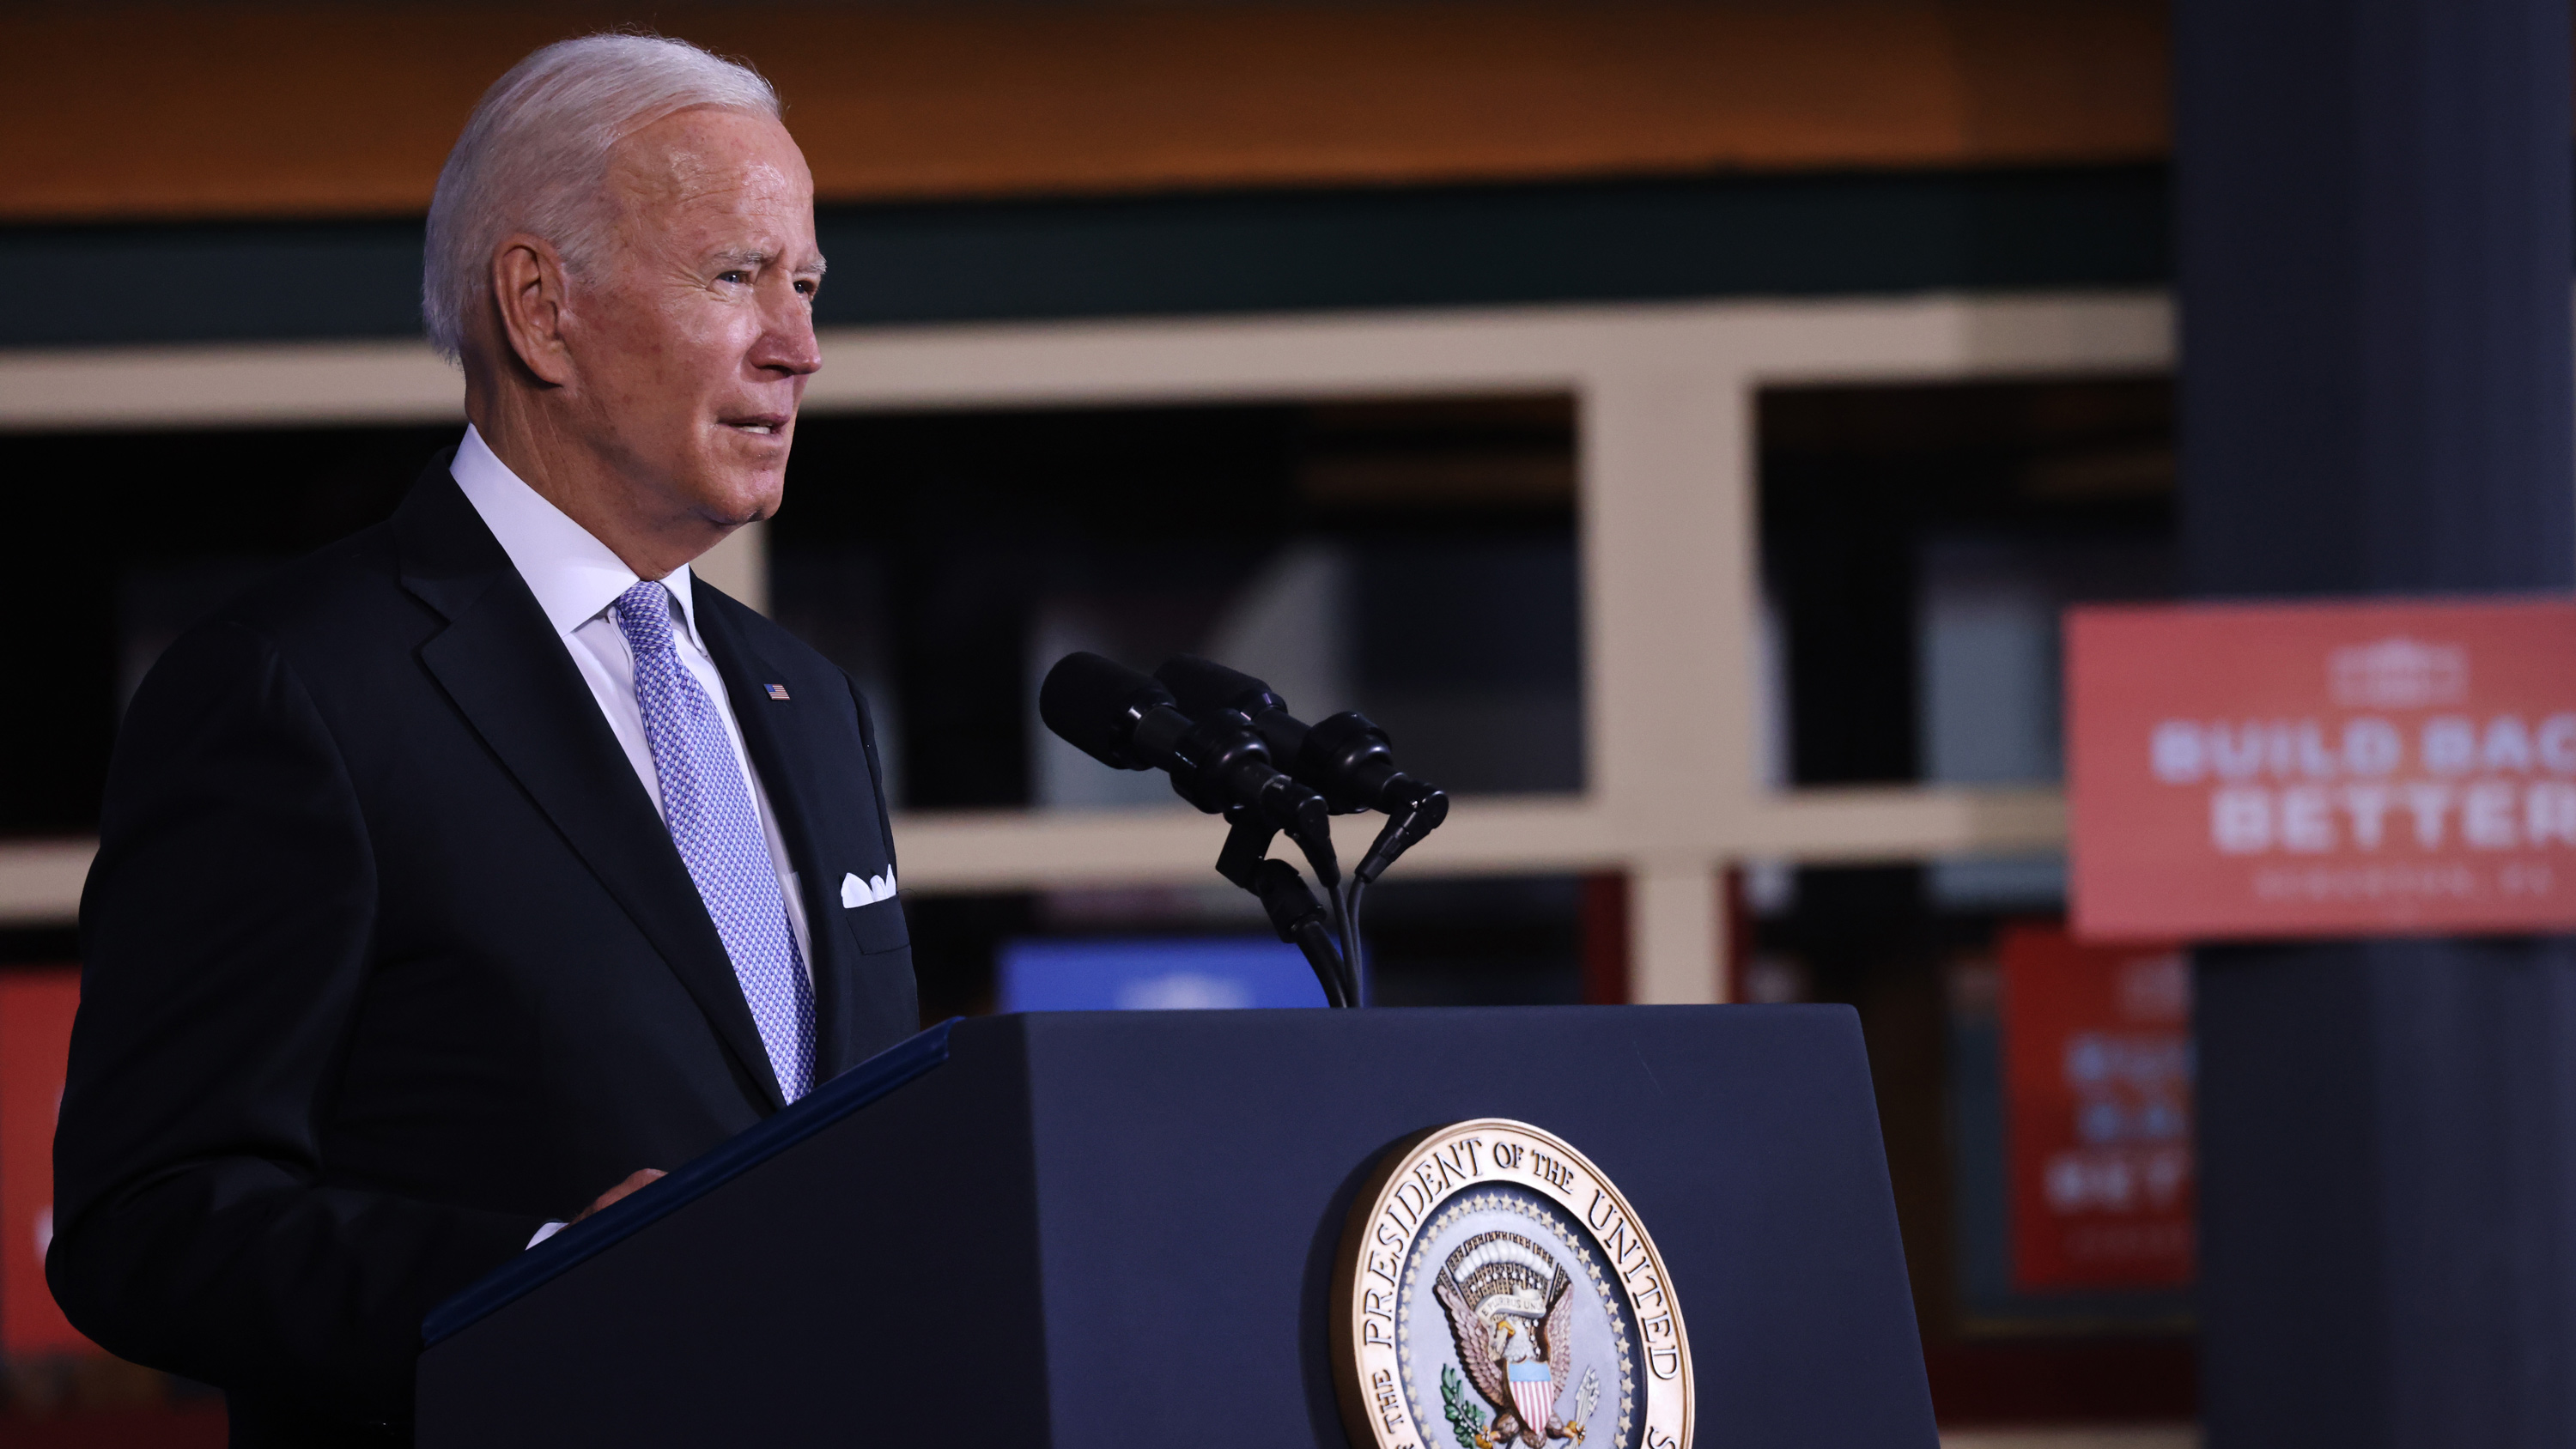 President Joe Biden speaks at an event at the Electric City Trolley Museum in Scranton, Pennsylvania, on October 20.